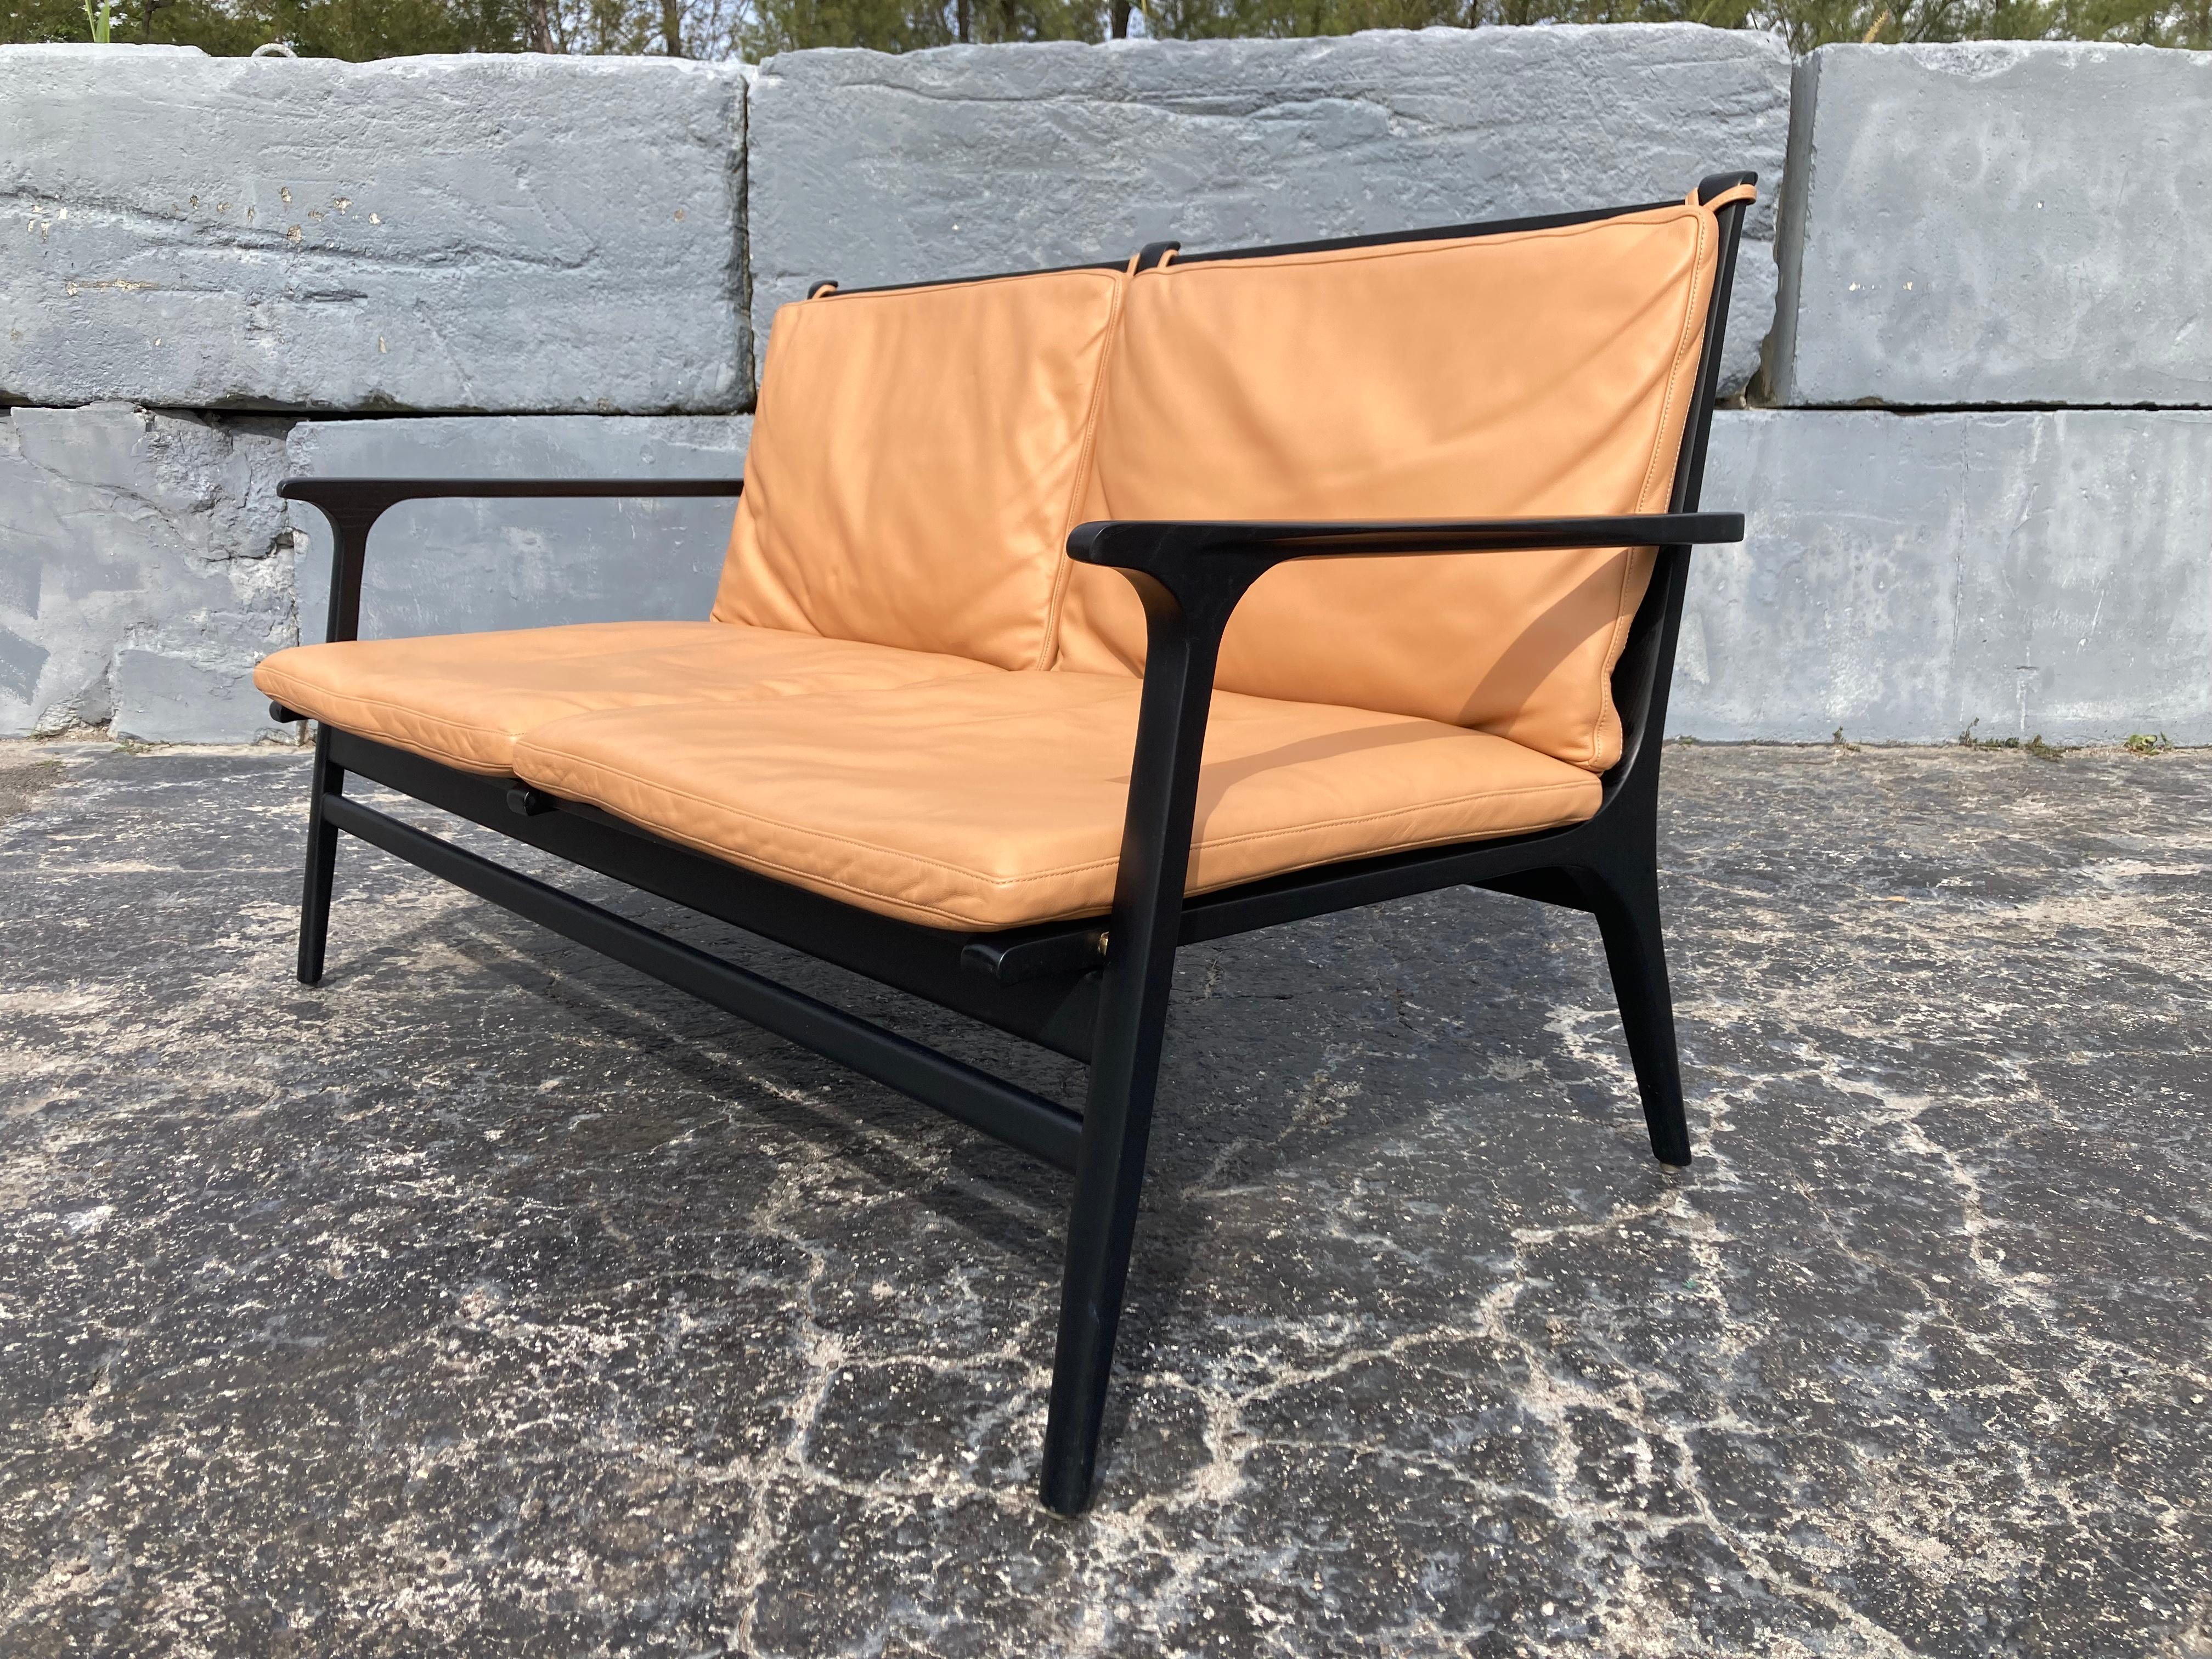 Rén Lounge Chair Two Seater Sofa by Stellar Works Designed by Space Copenhagen, Oak, Leather. Matching chair available.